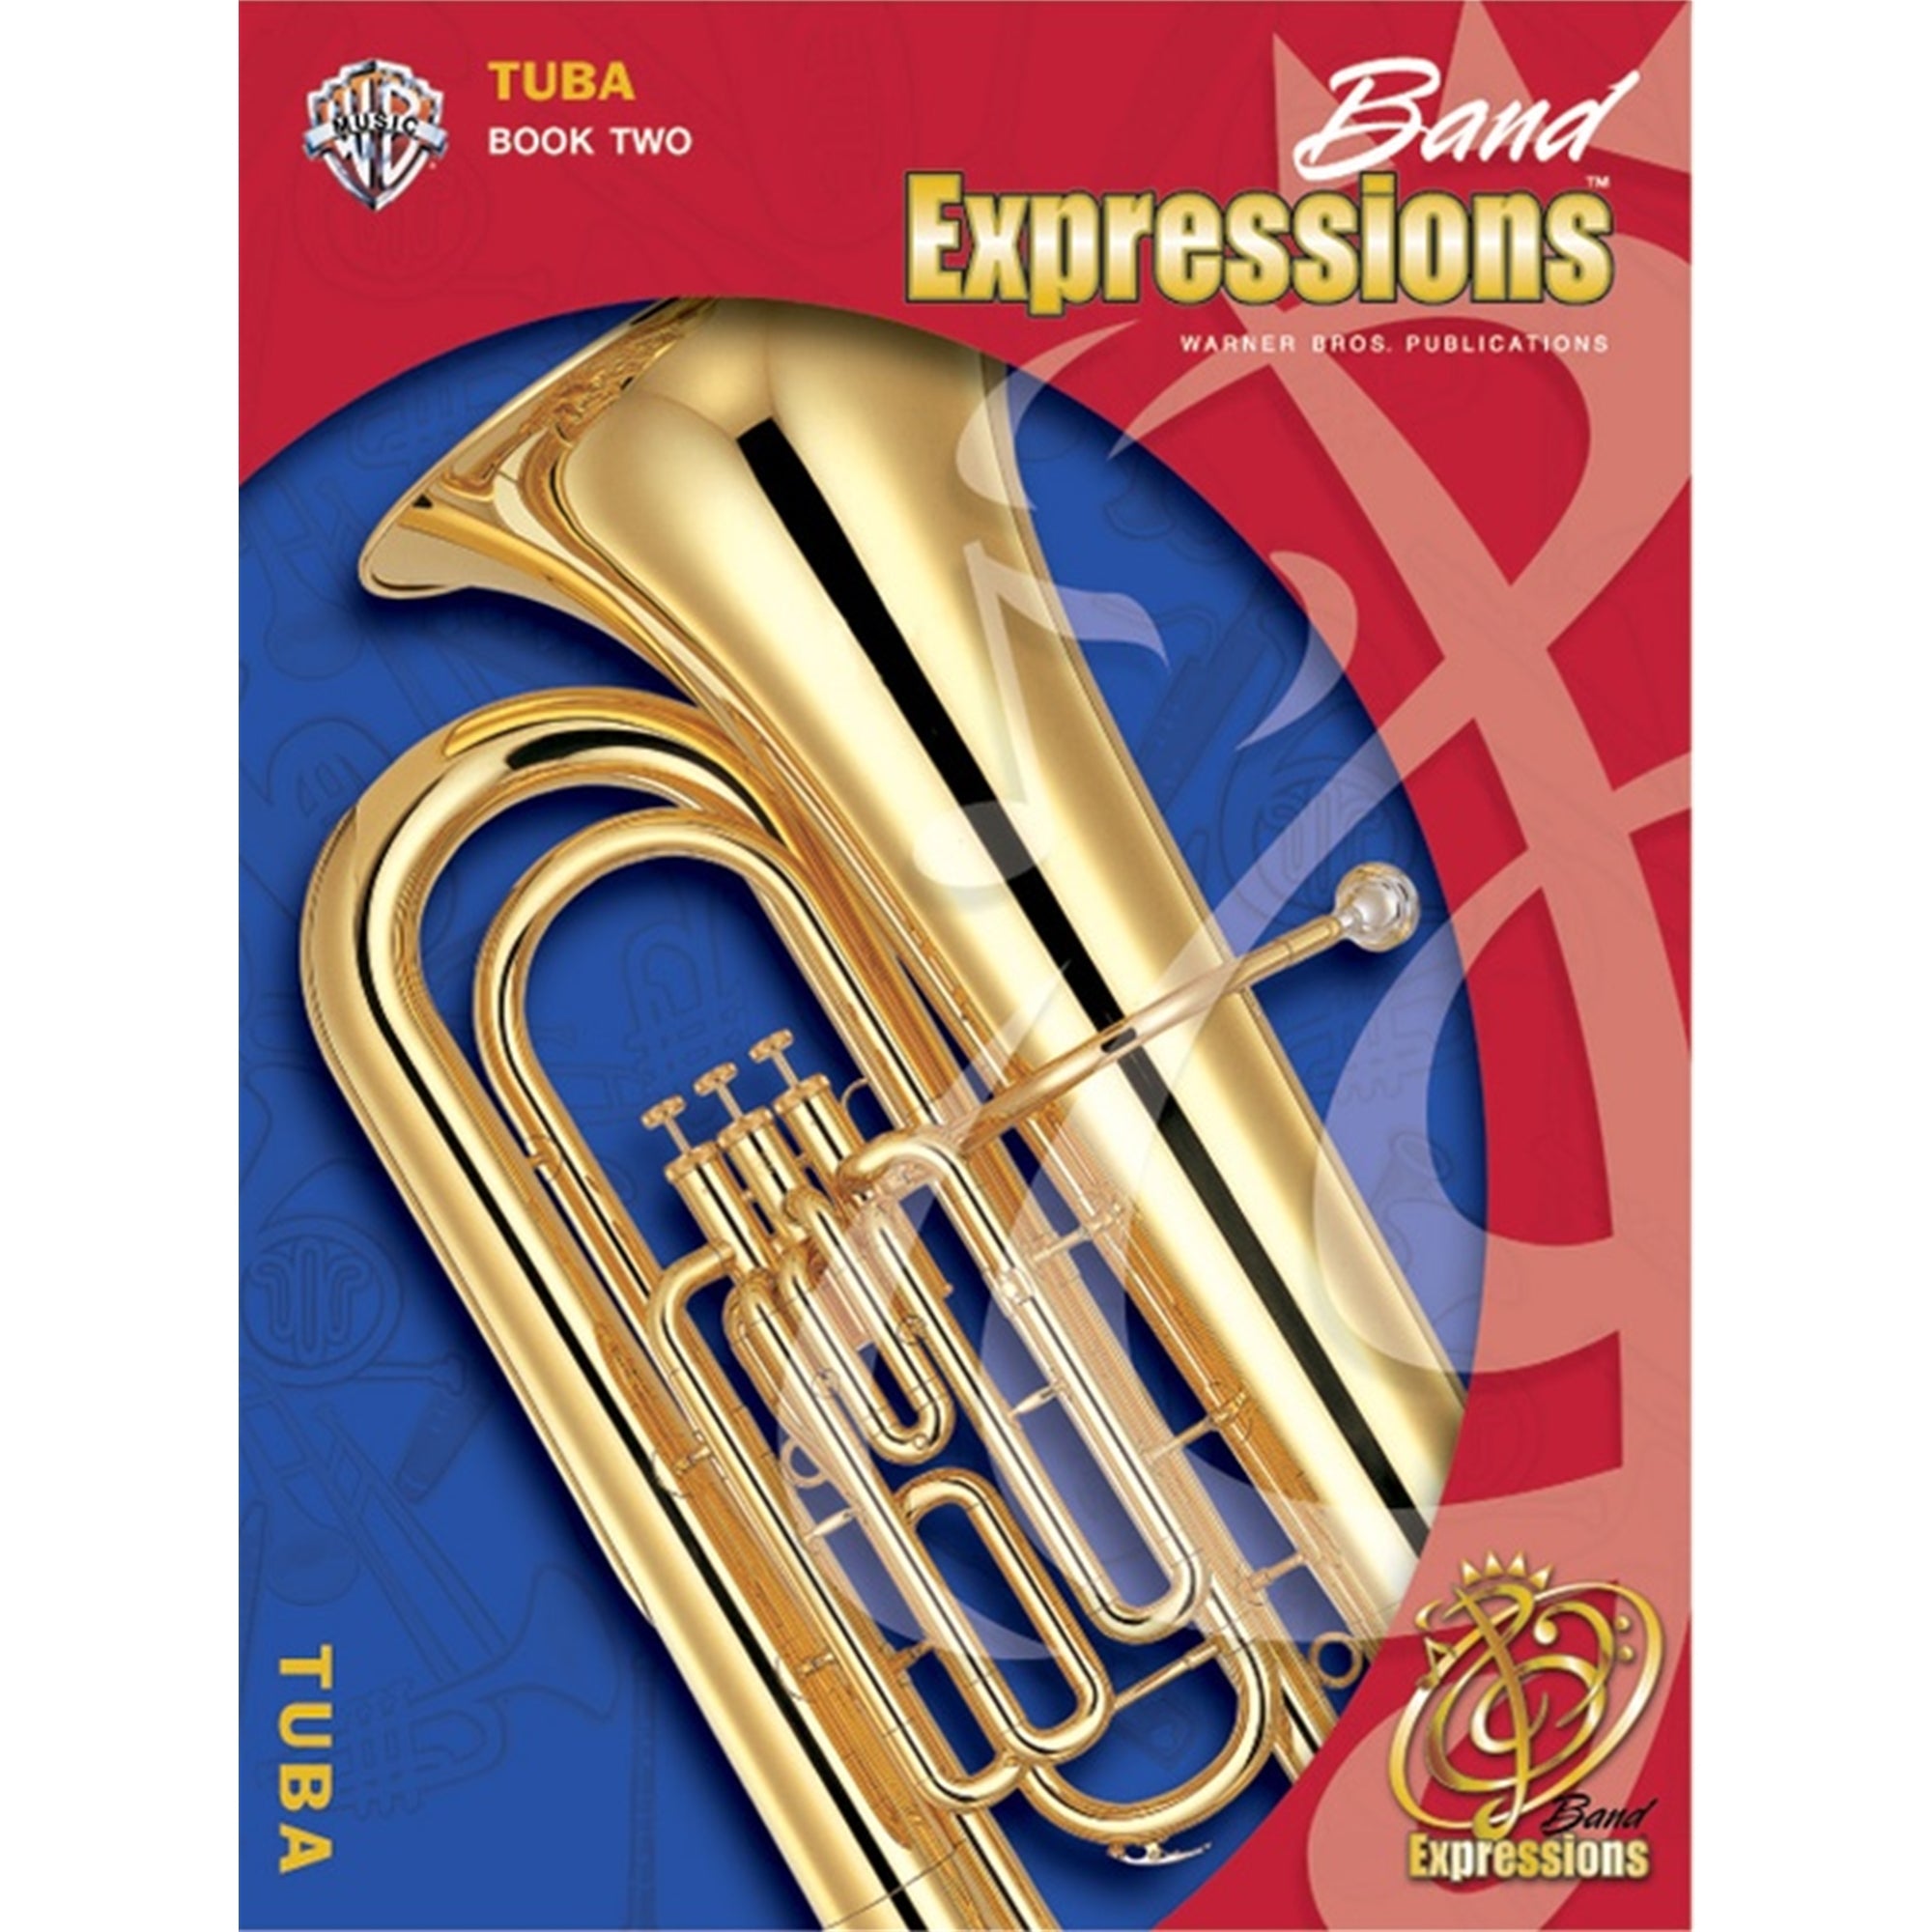 ALFRED 00EMCB2015CD Band Expressions , Book Two: Student Edition [Tuba]